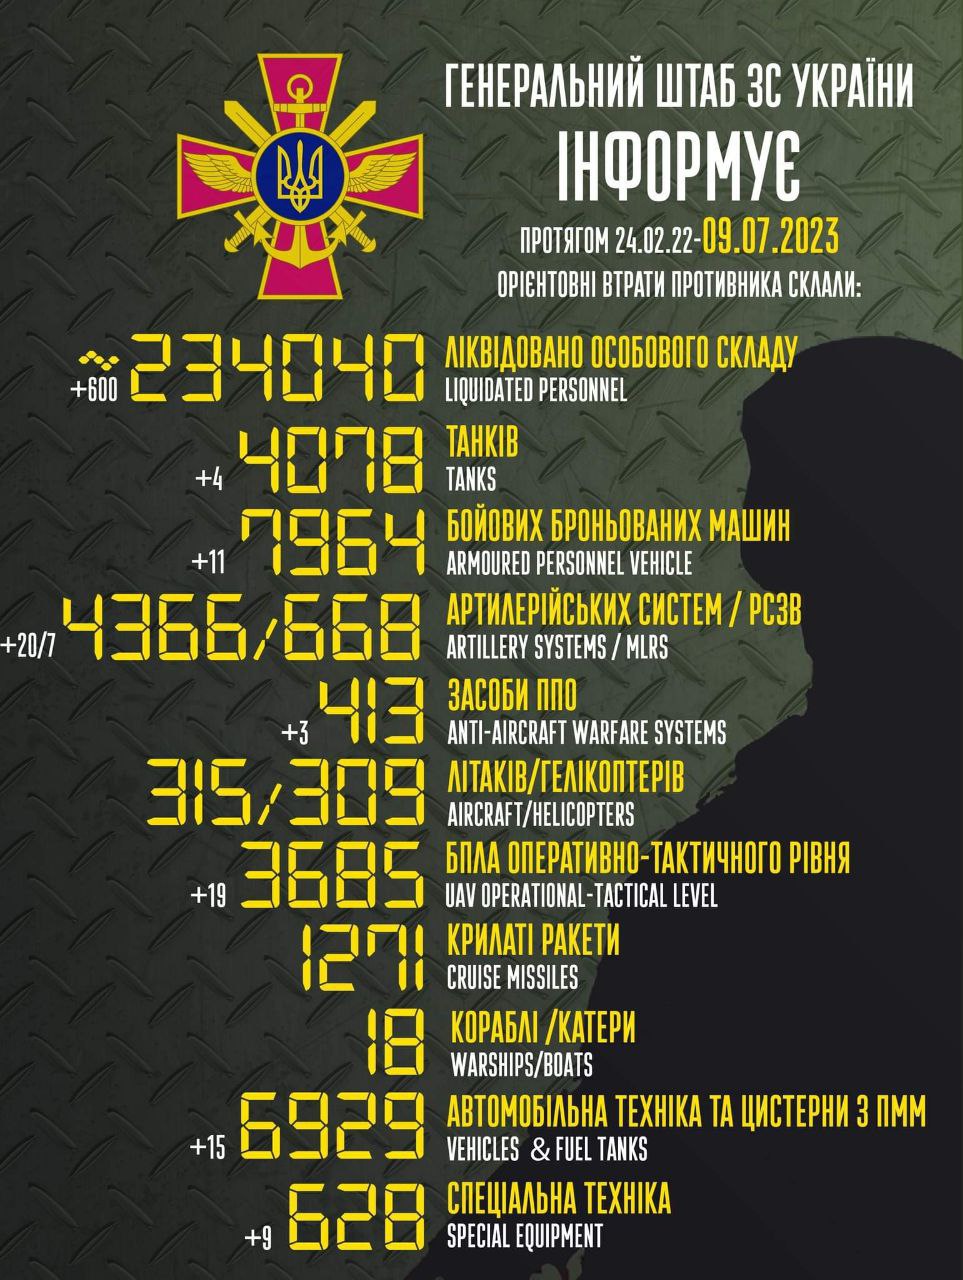 The total combat losses of the enemy from 24.02.2022 to 09.07.2023